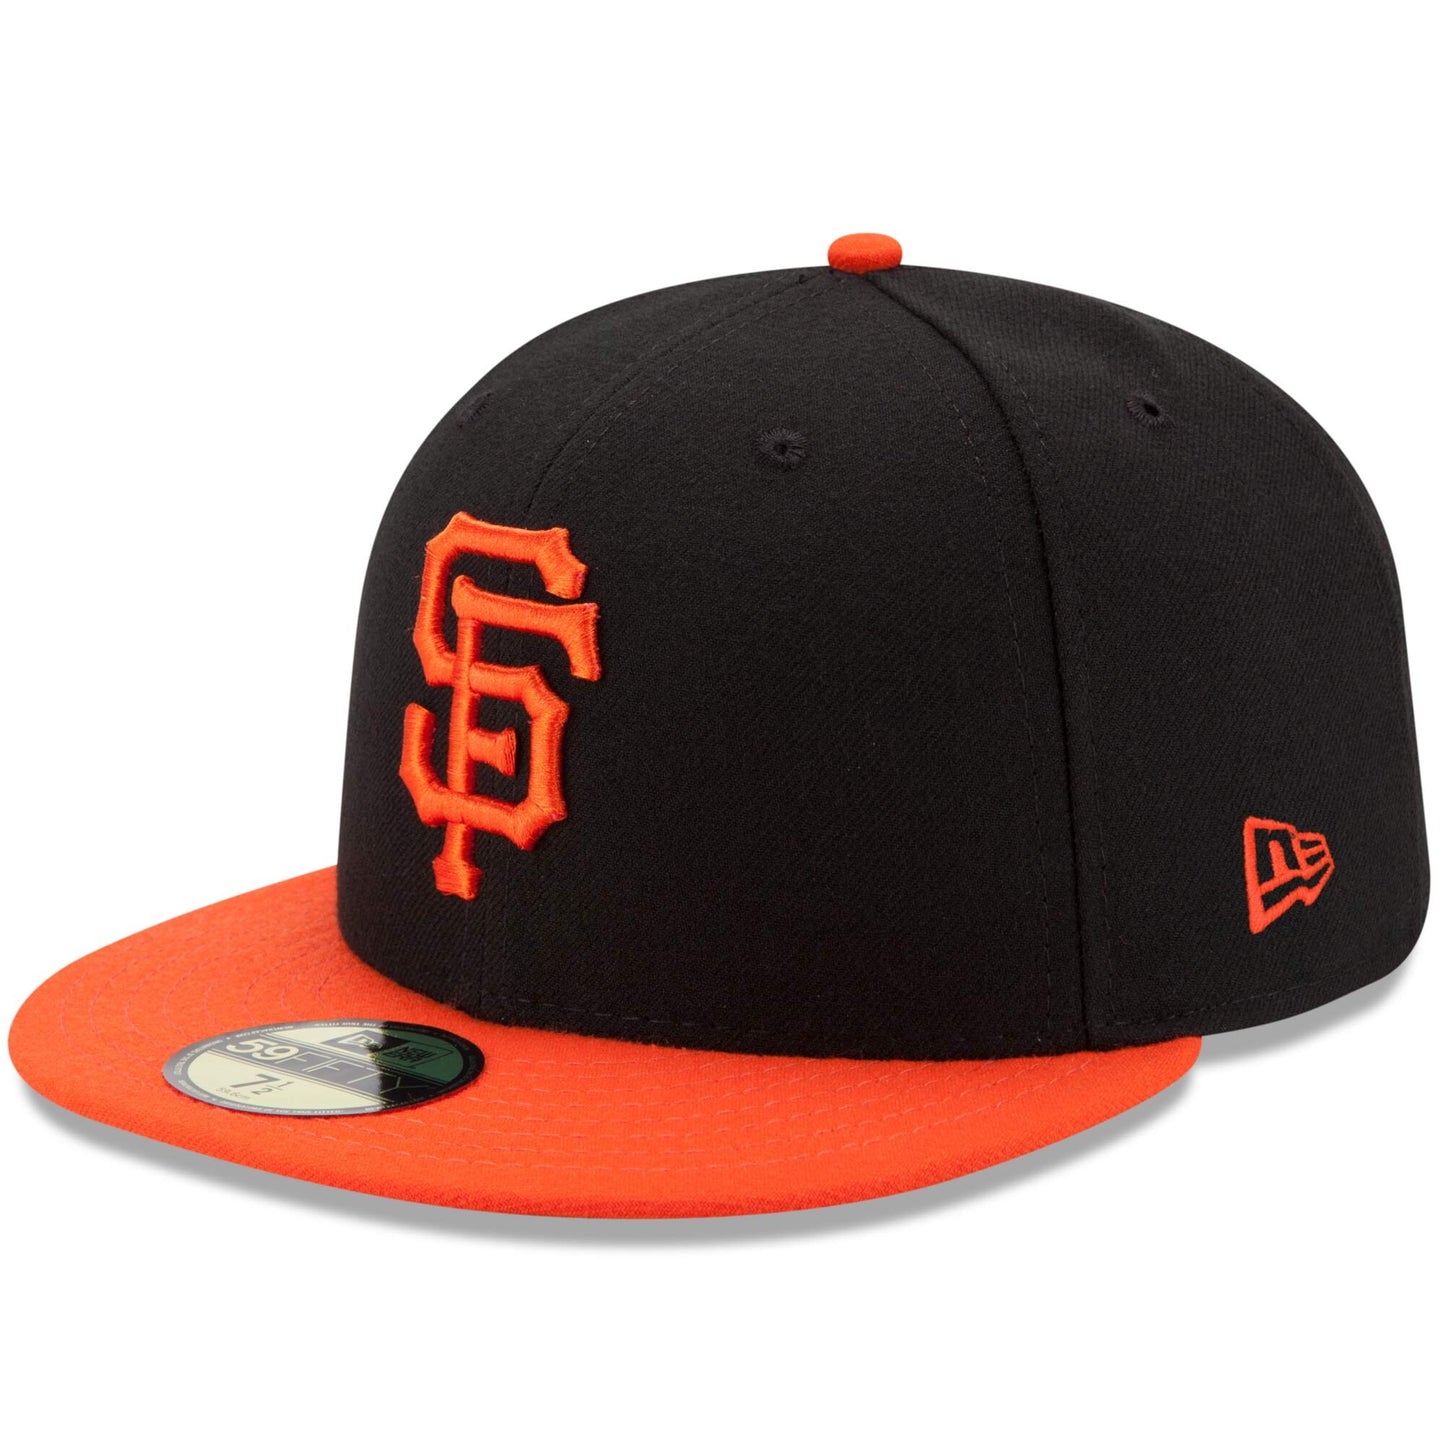 Men's San Francisco Giants New Era Black/Orange Alternate Game Authentic Collection On-Field 59FIFTY Fitted Hat